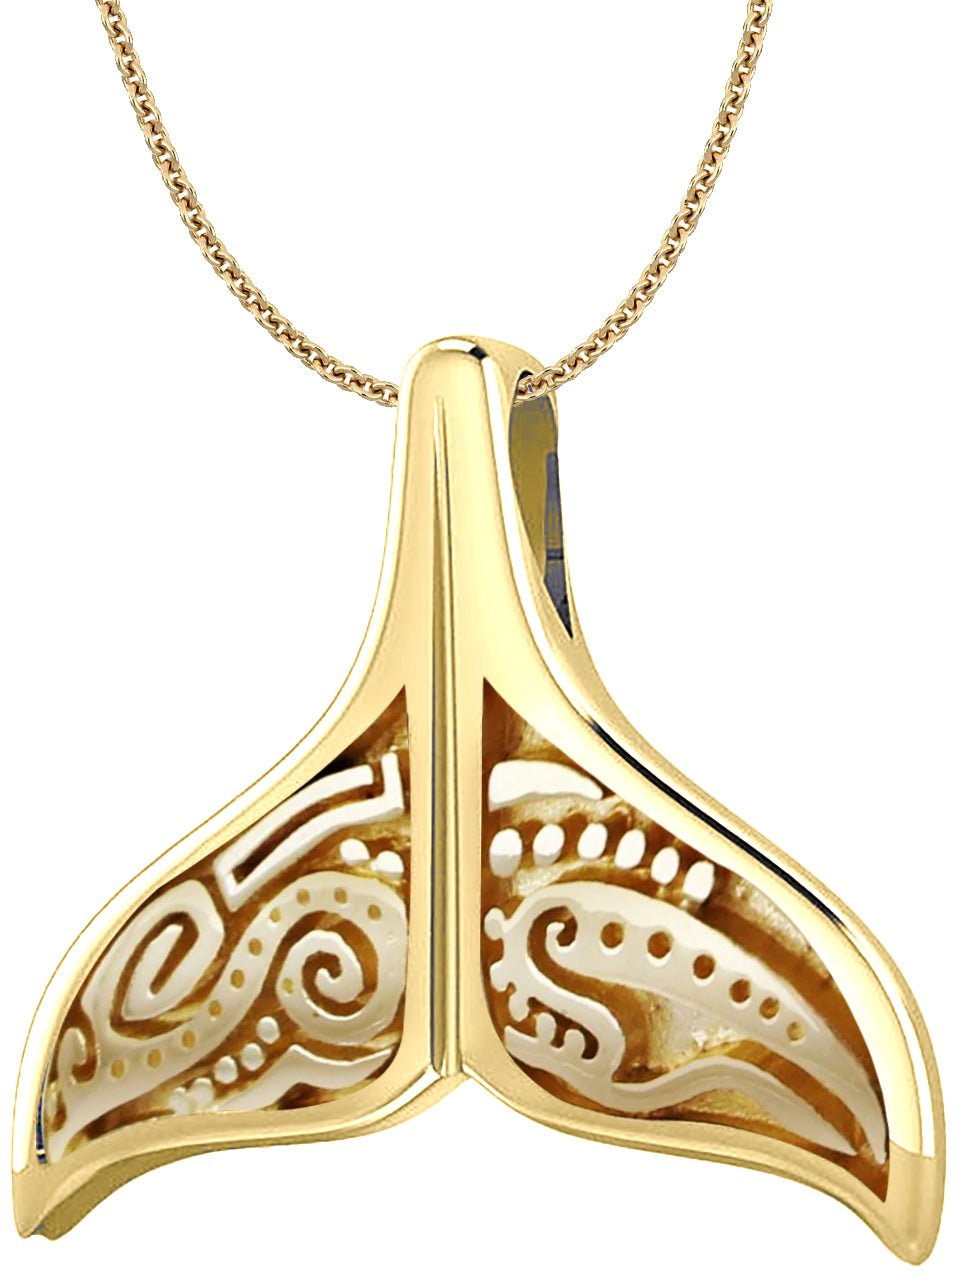 Solid 14k Yellow Gold Aboriginal Whale Tail Aquatic Charm Pendant Necklace  - 16in, 1.5mm Cable Chain